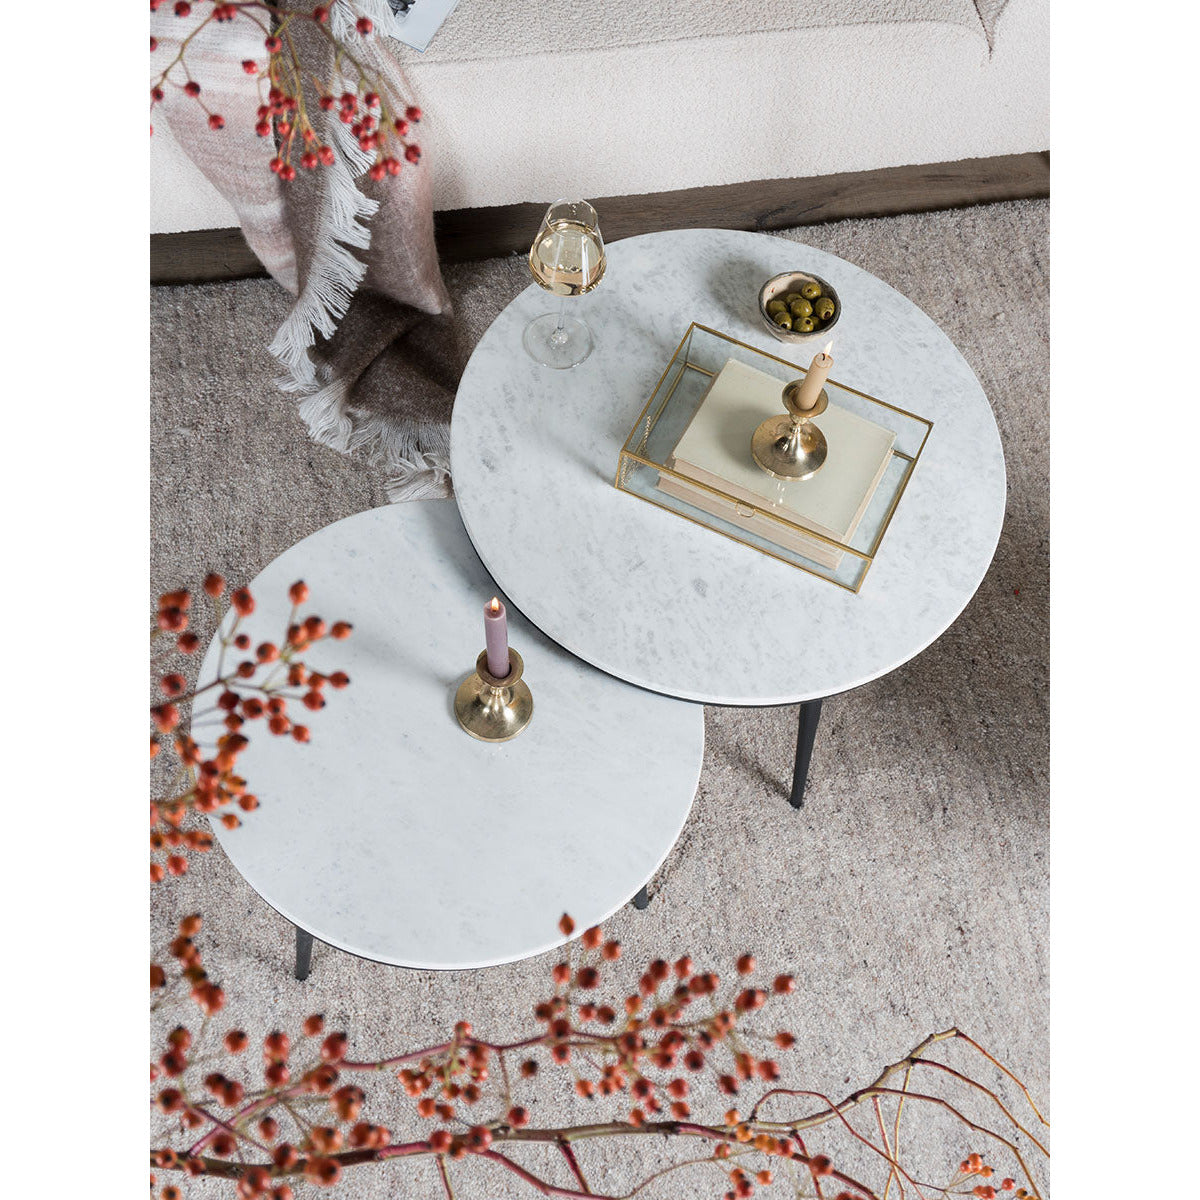 Coffee table Melle - Marble - 55 cm